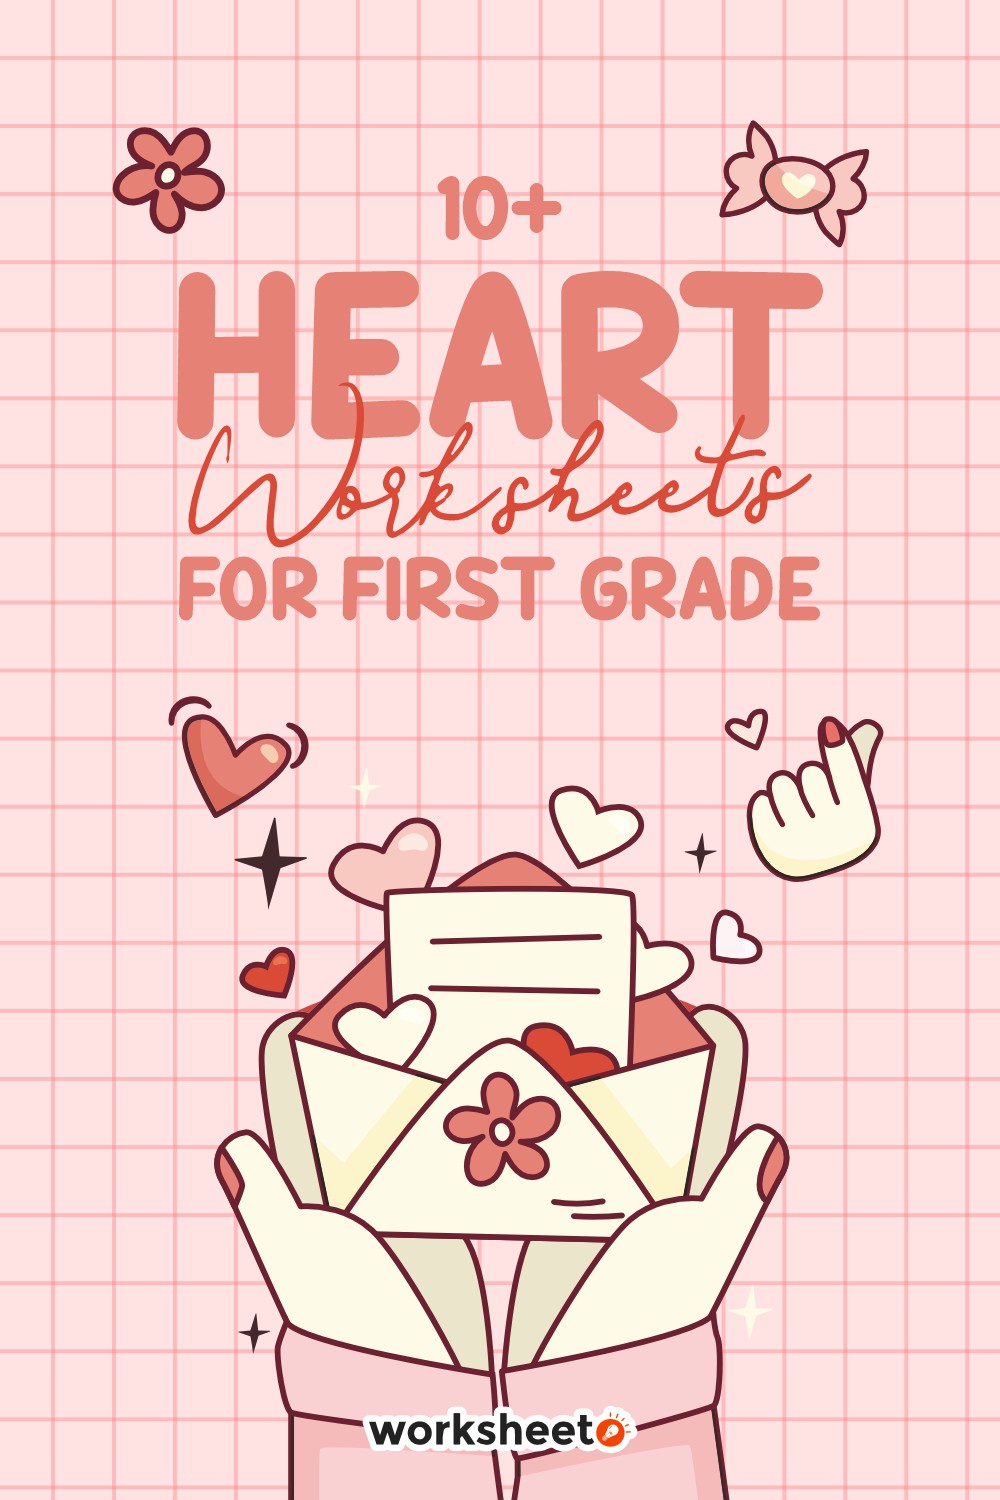 Heart Worksheets for First Grade